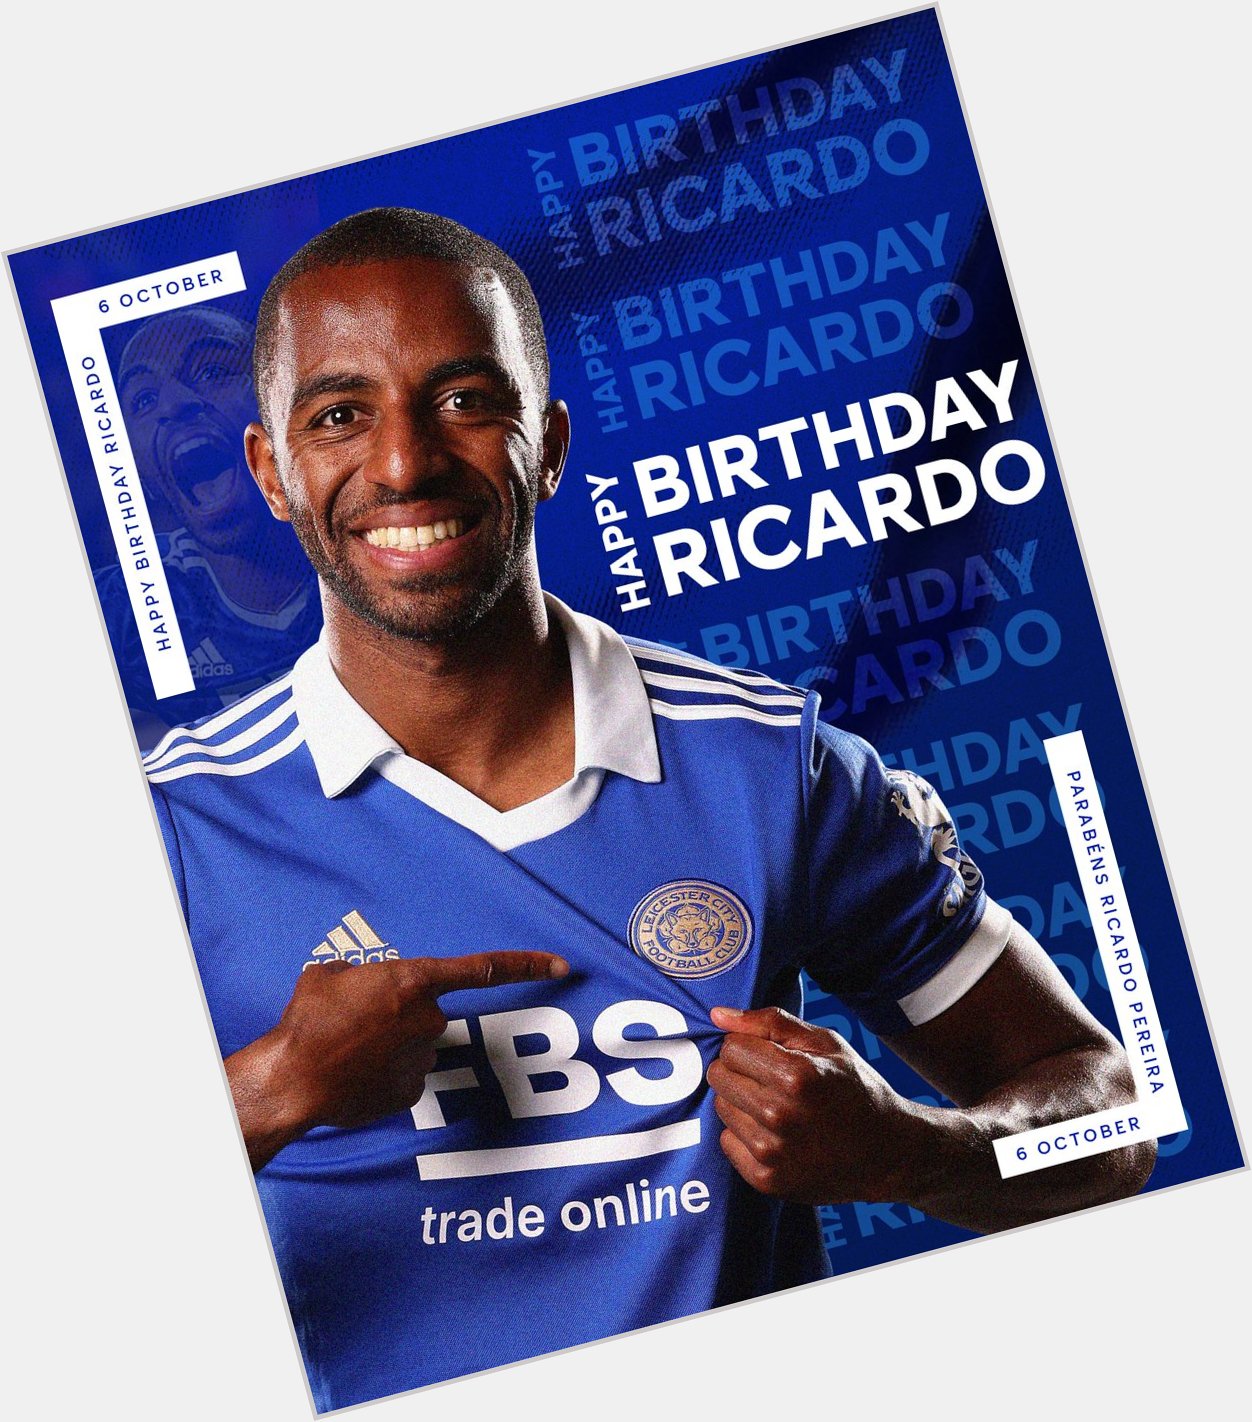 Happy birthday, Ricardo Pereira! Wishing you all the best in your continued recovery 